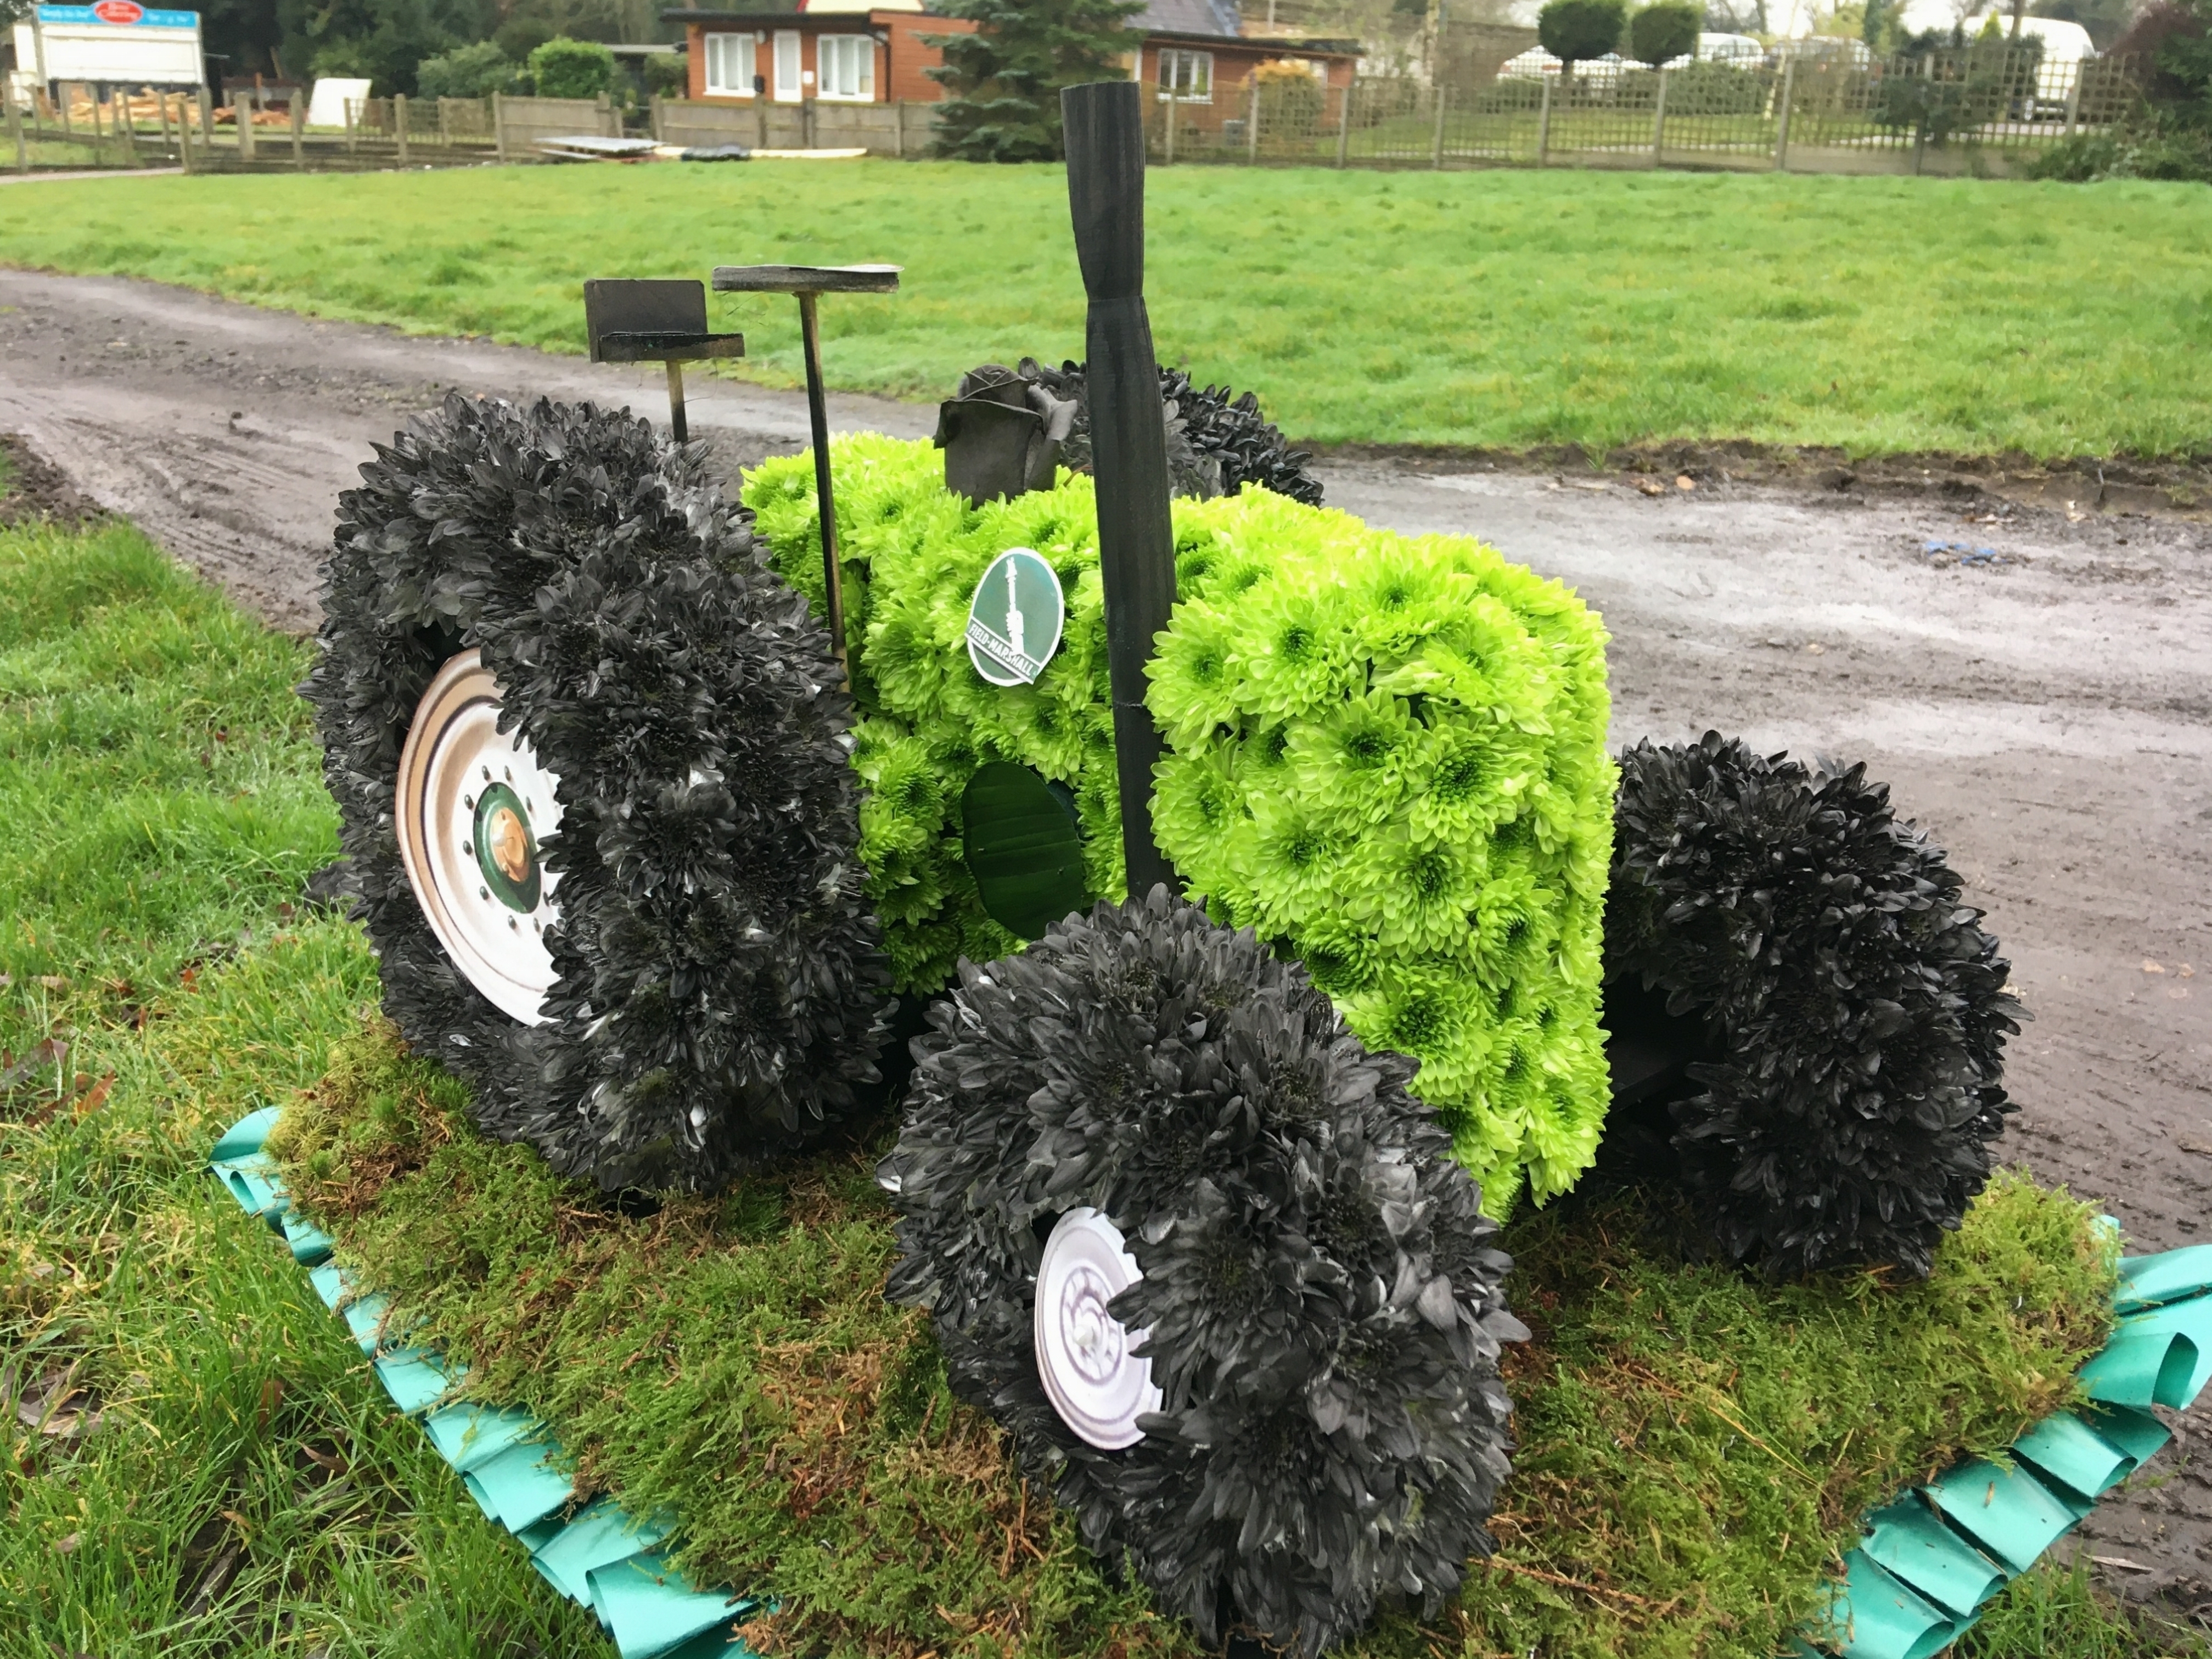 Tractor made from flowers